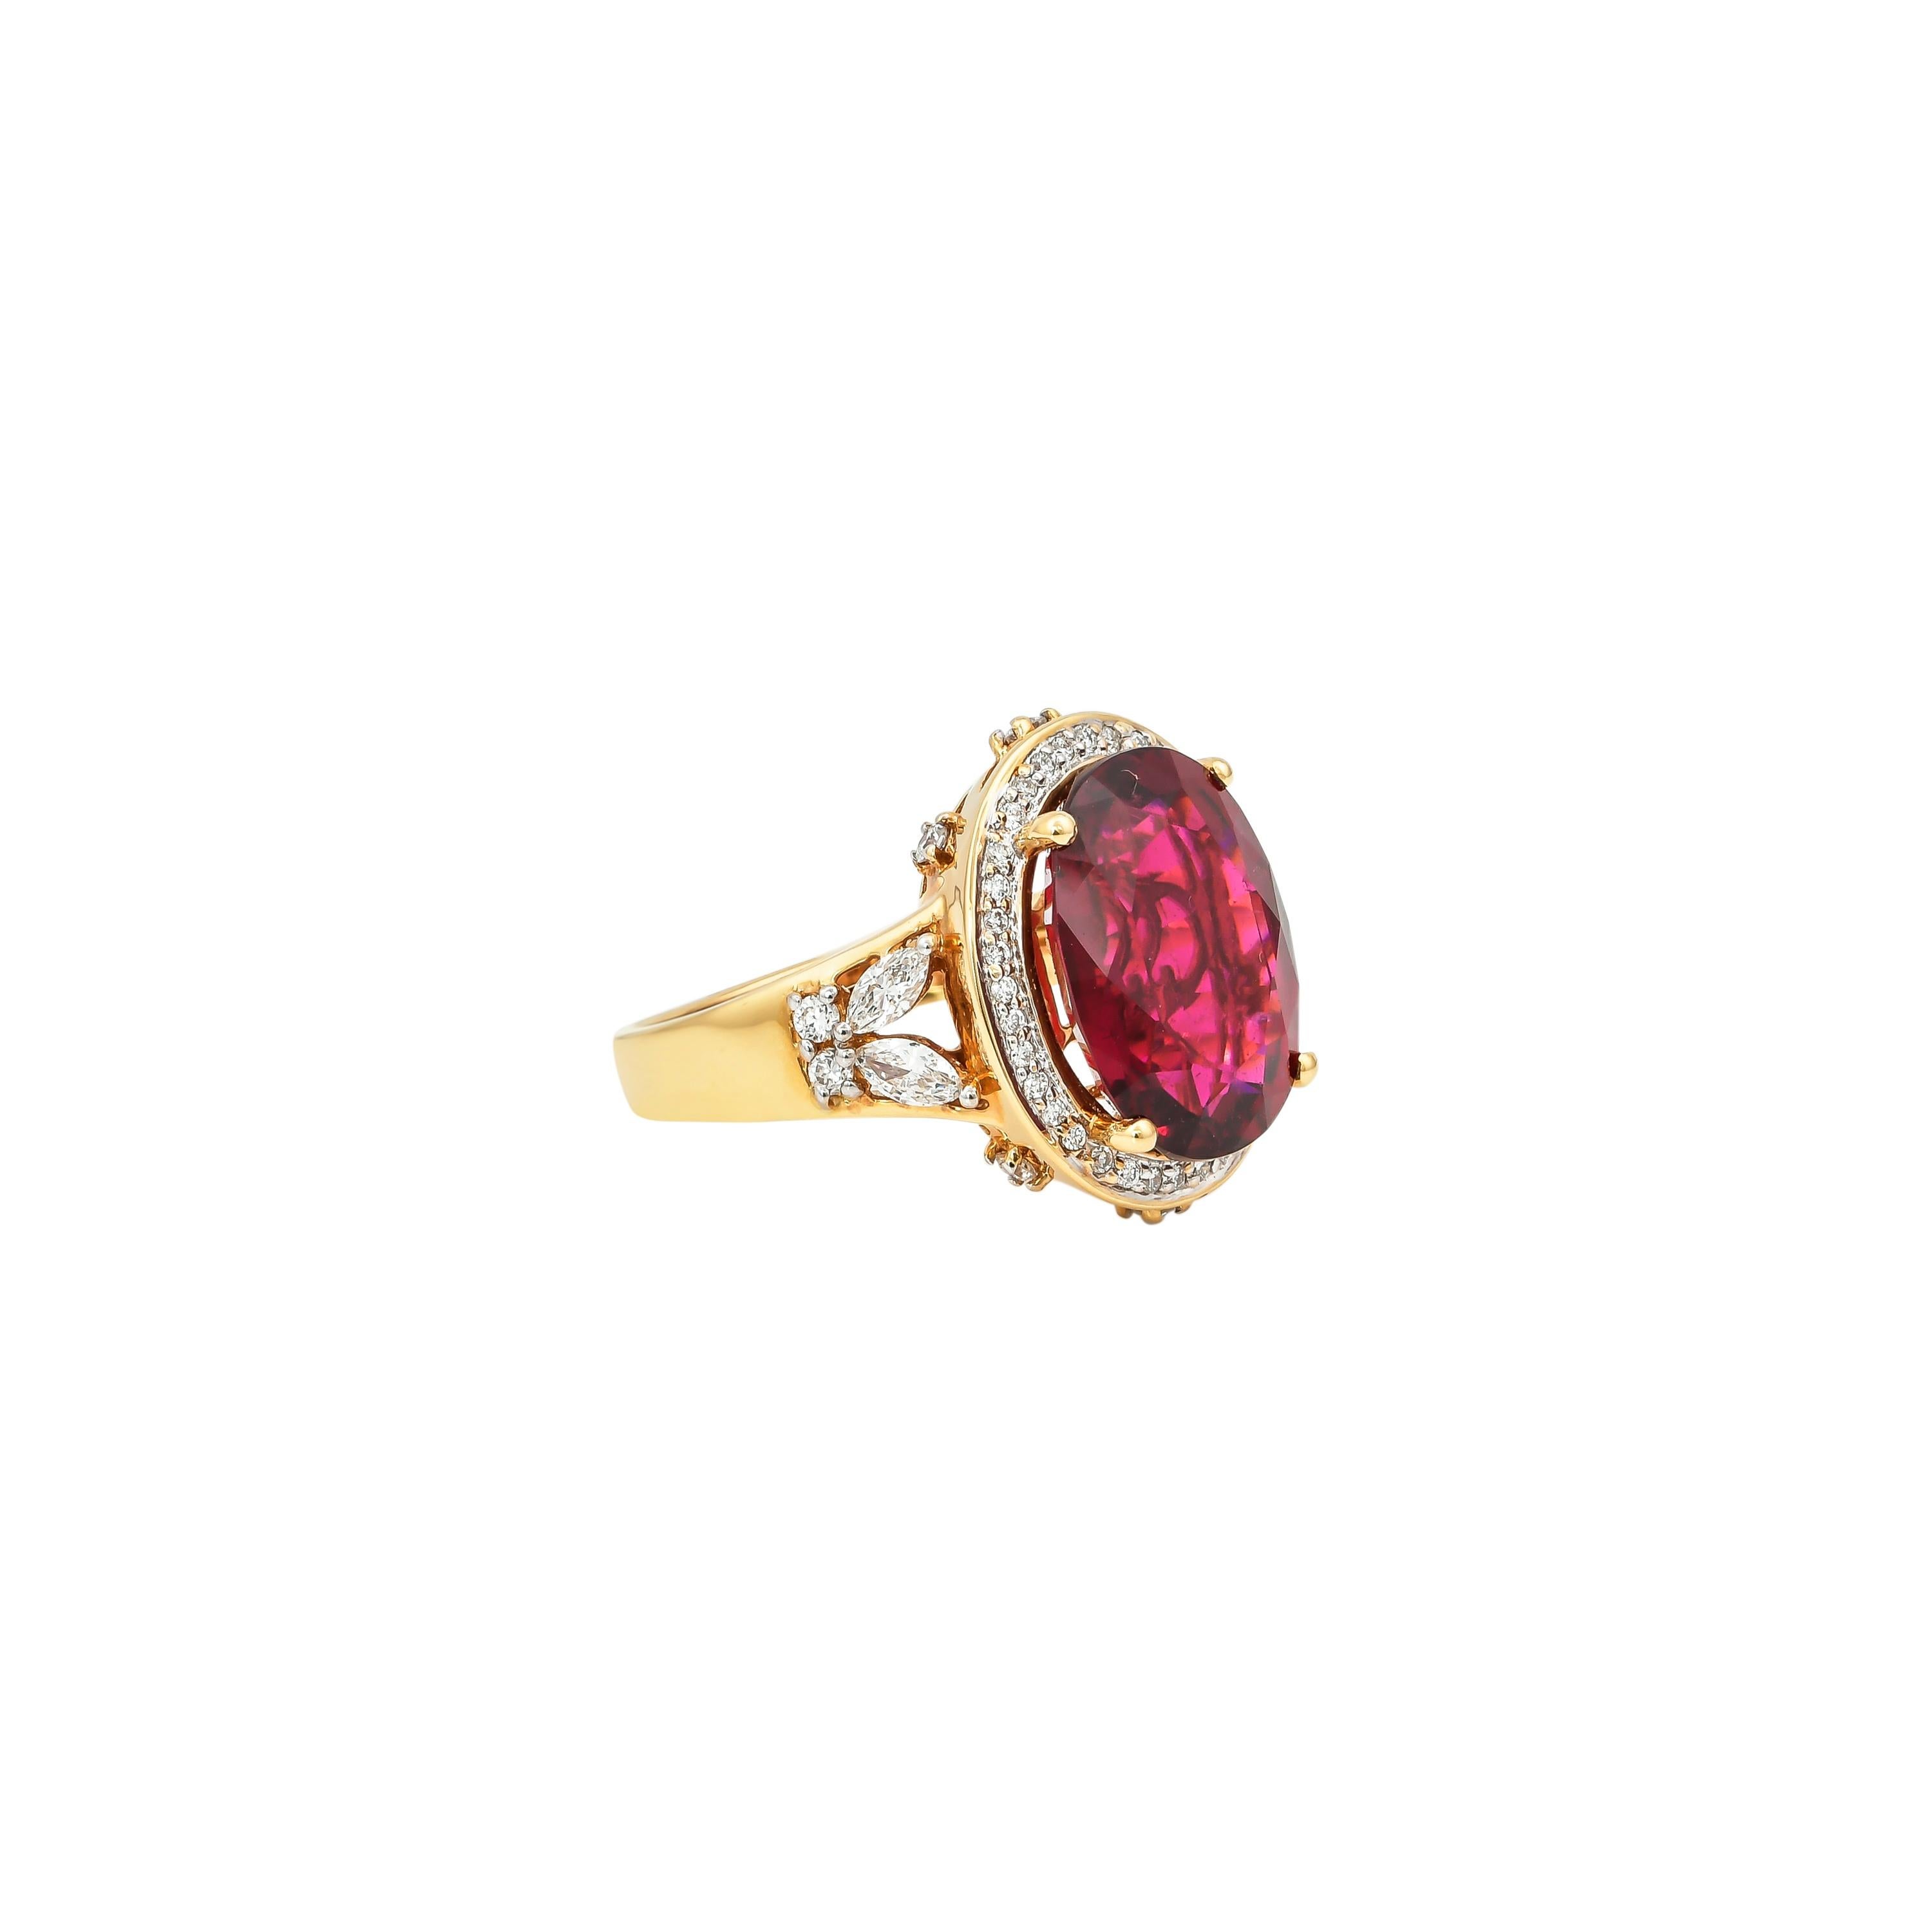 6.77 Carat Oval Shaped Rubelite Ring in 18 Karat Yellow Gold with ...